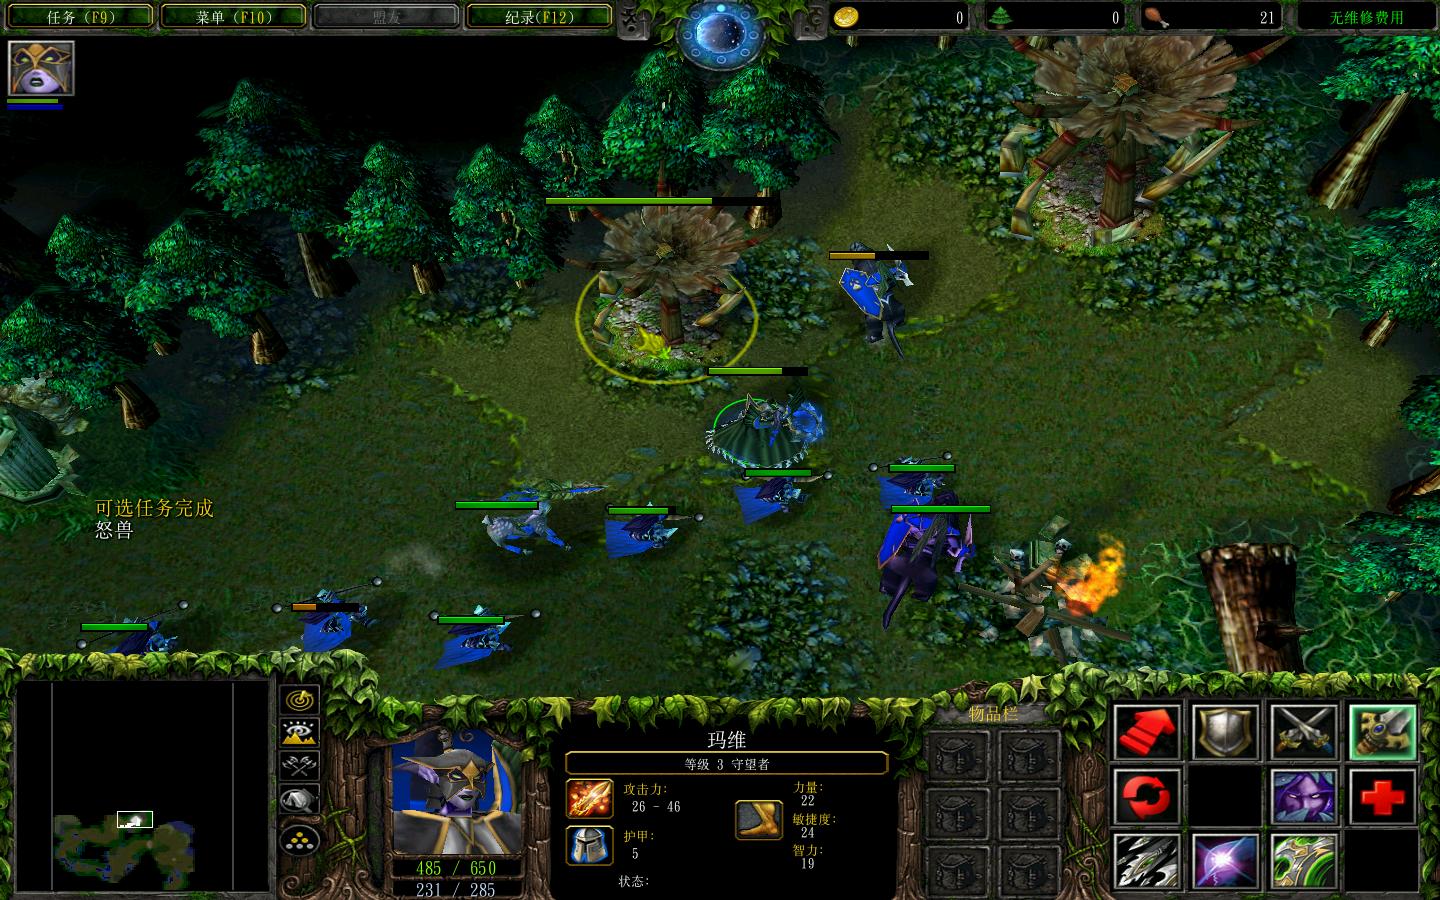 ħ3Warcraft III The Frozen Thronev1.24֮ v2.70A